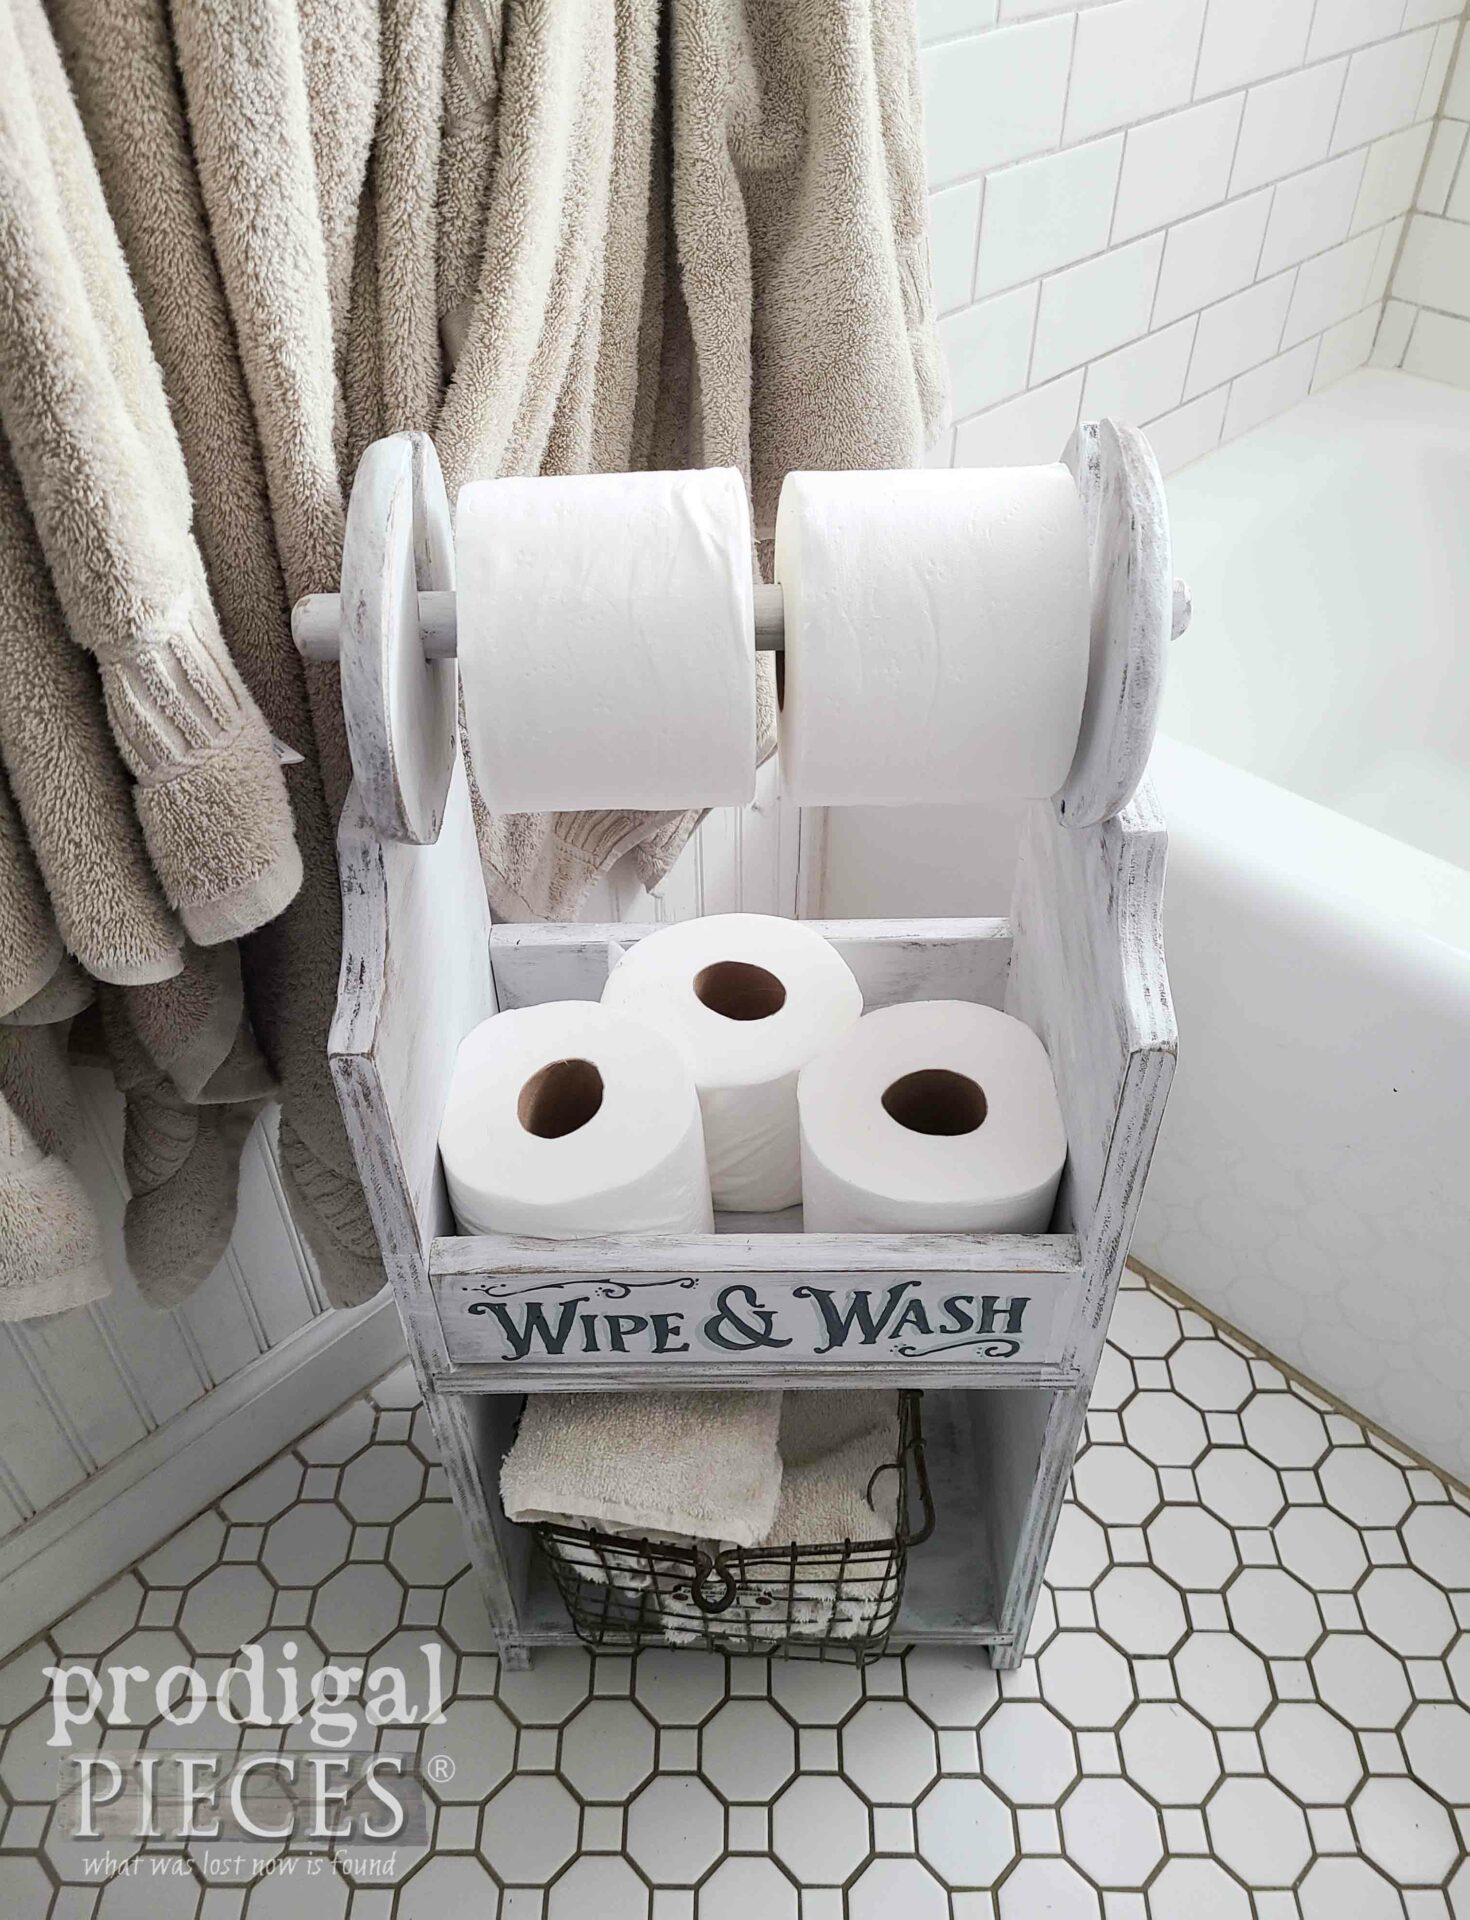 Top Vie of Toilet Paper Holder by Larissa of Prodigal Pieces | prodigalpieces.com #prodigalpieces #storage #woodworking